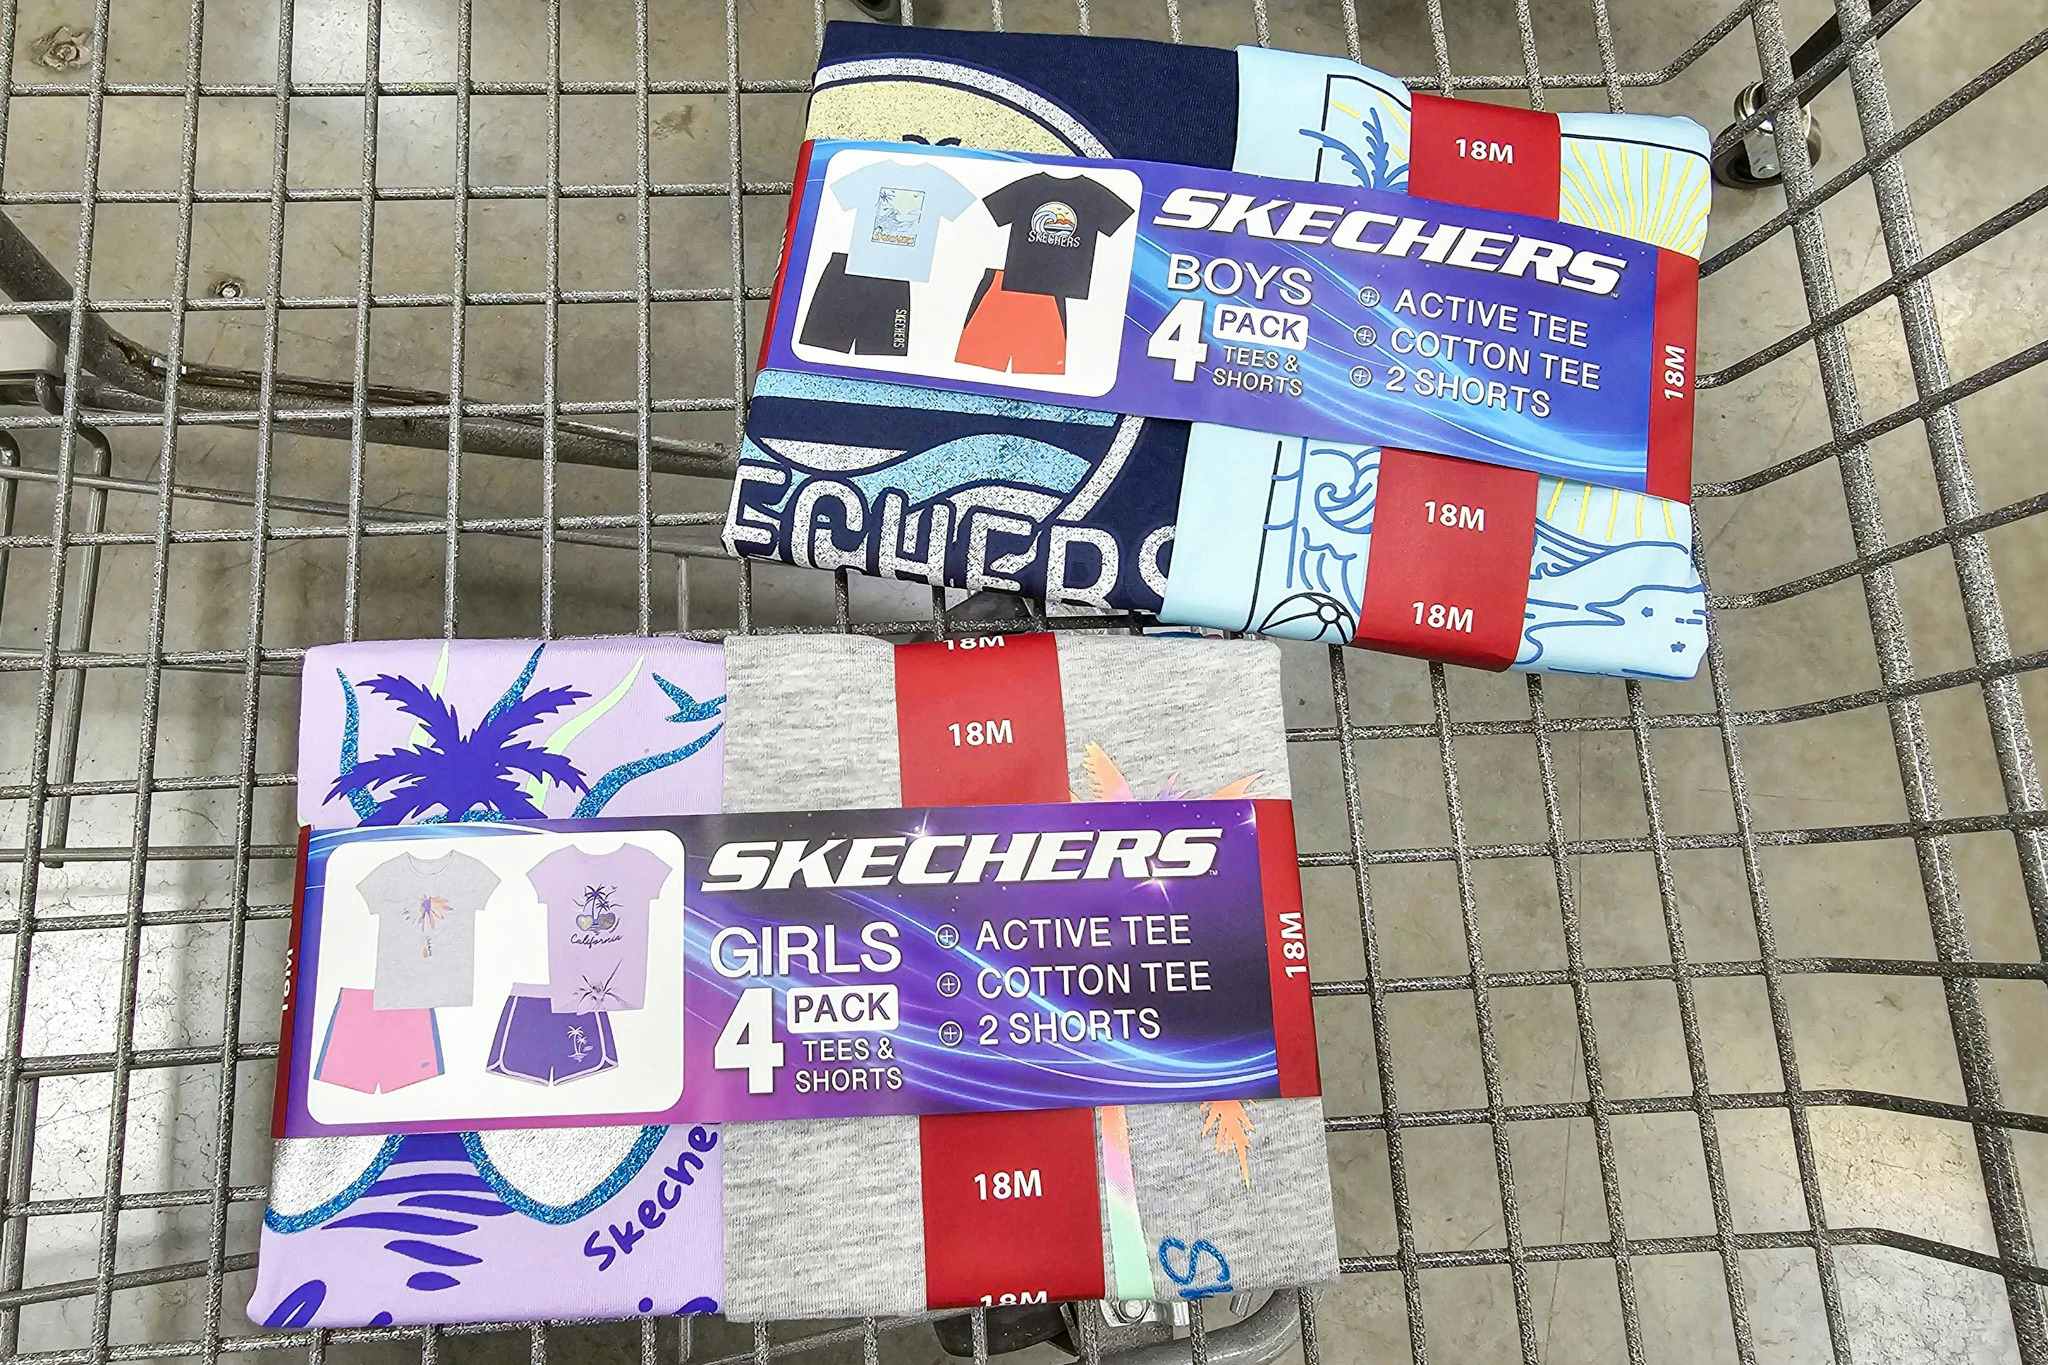 Skechers Kids' 4-Piece Outfit Sets, Only $9.98 at Sam's Club